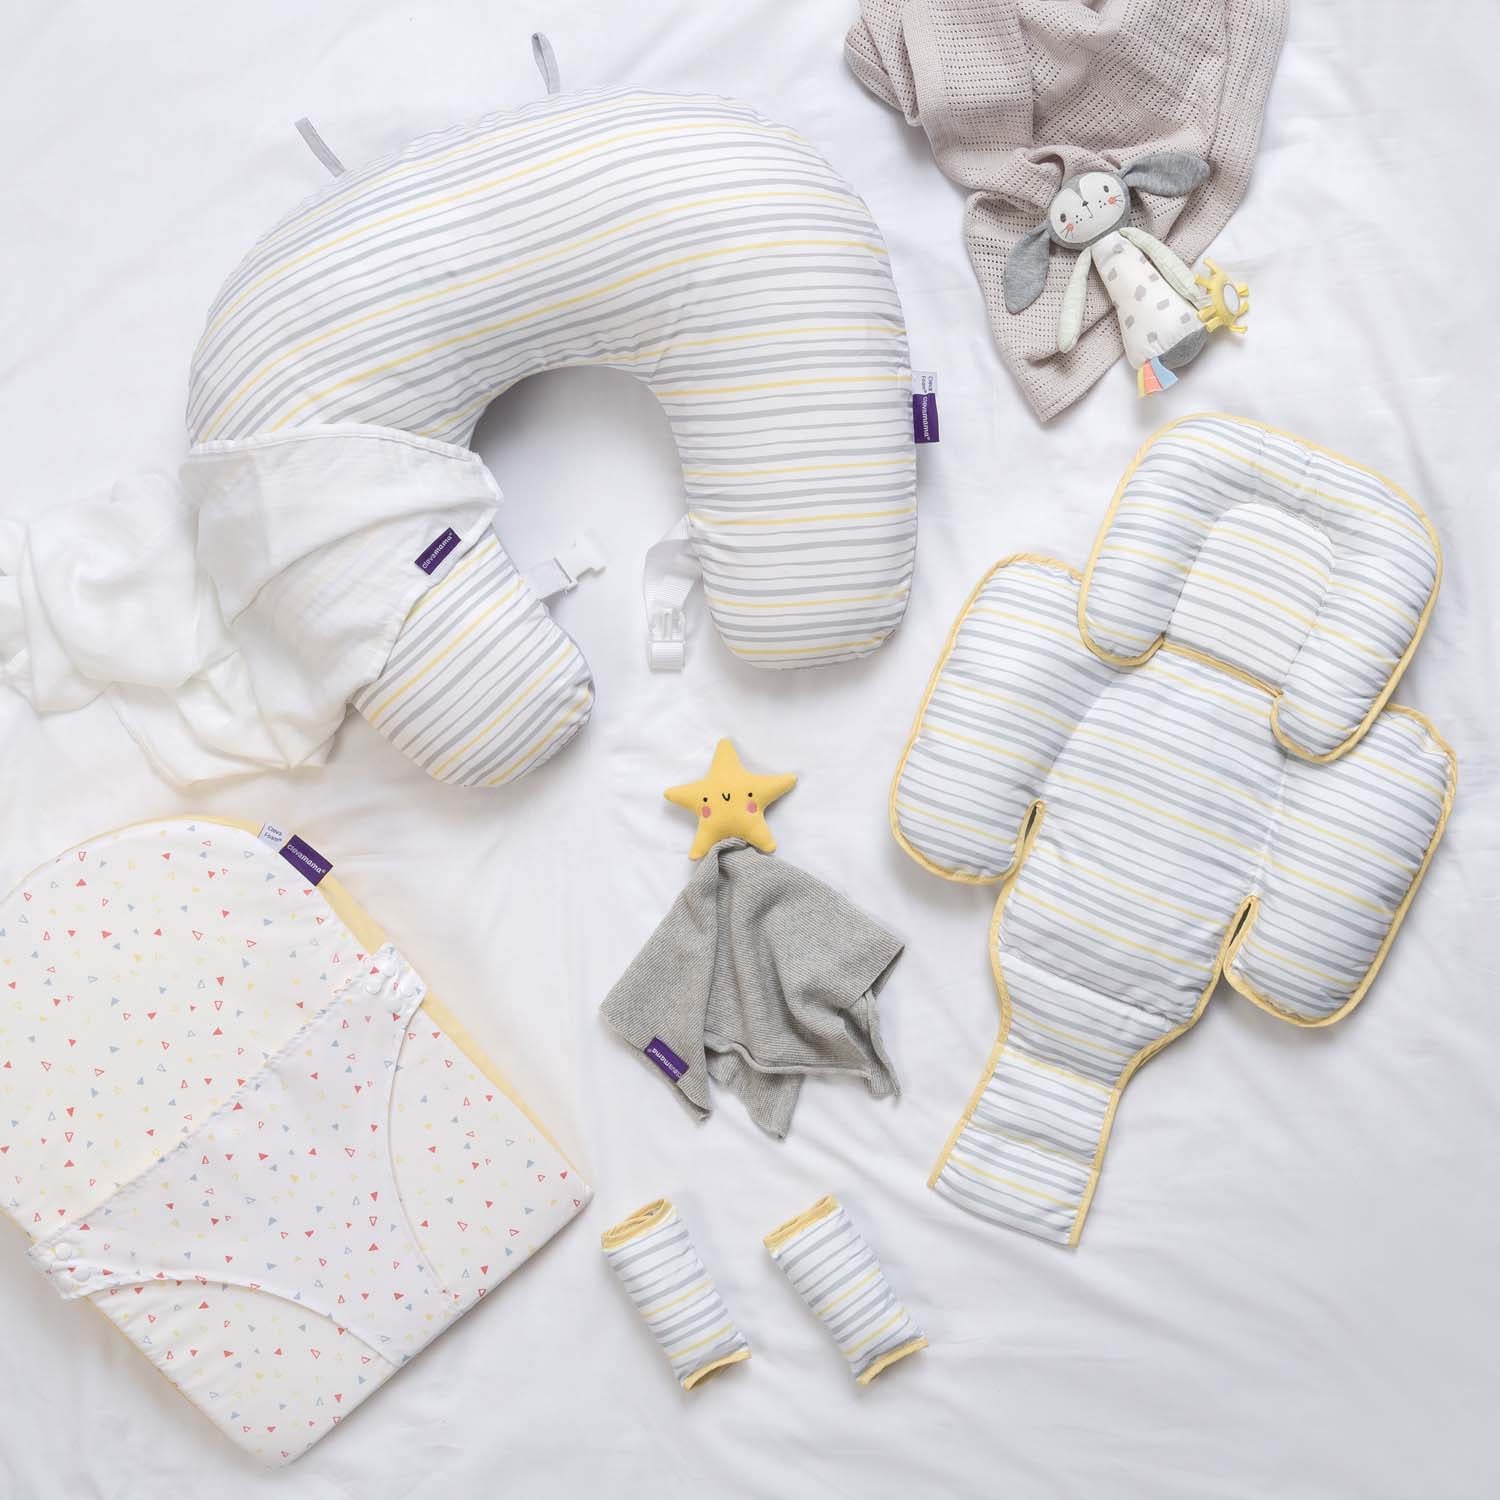 Nursing pillow and baby accessories